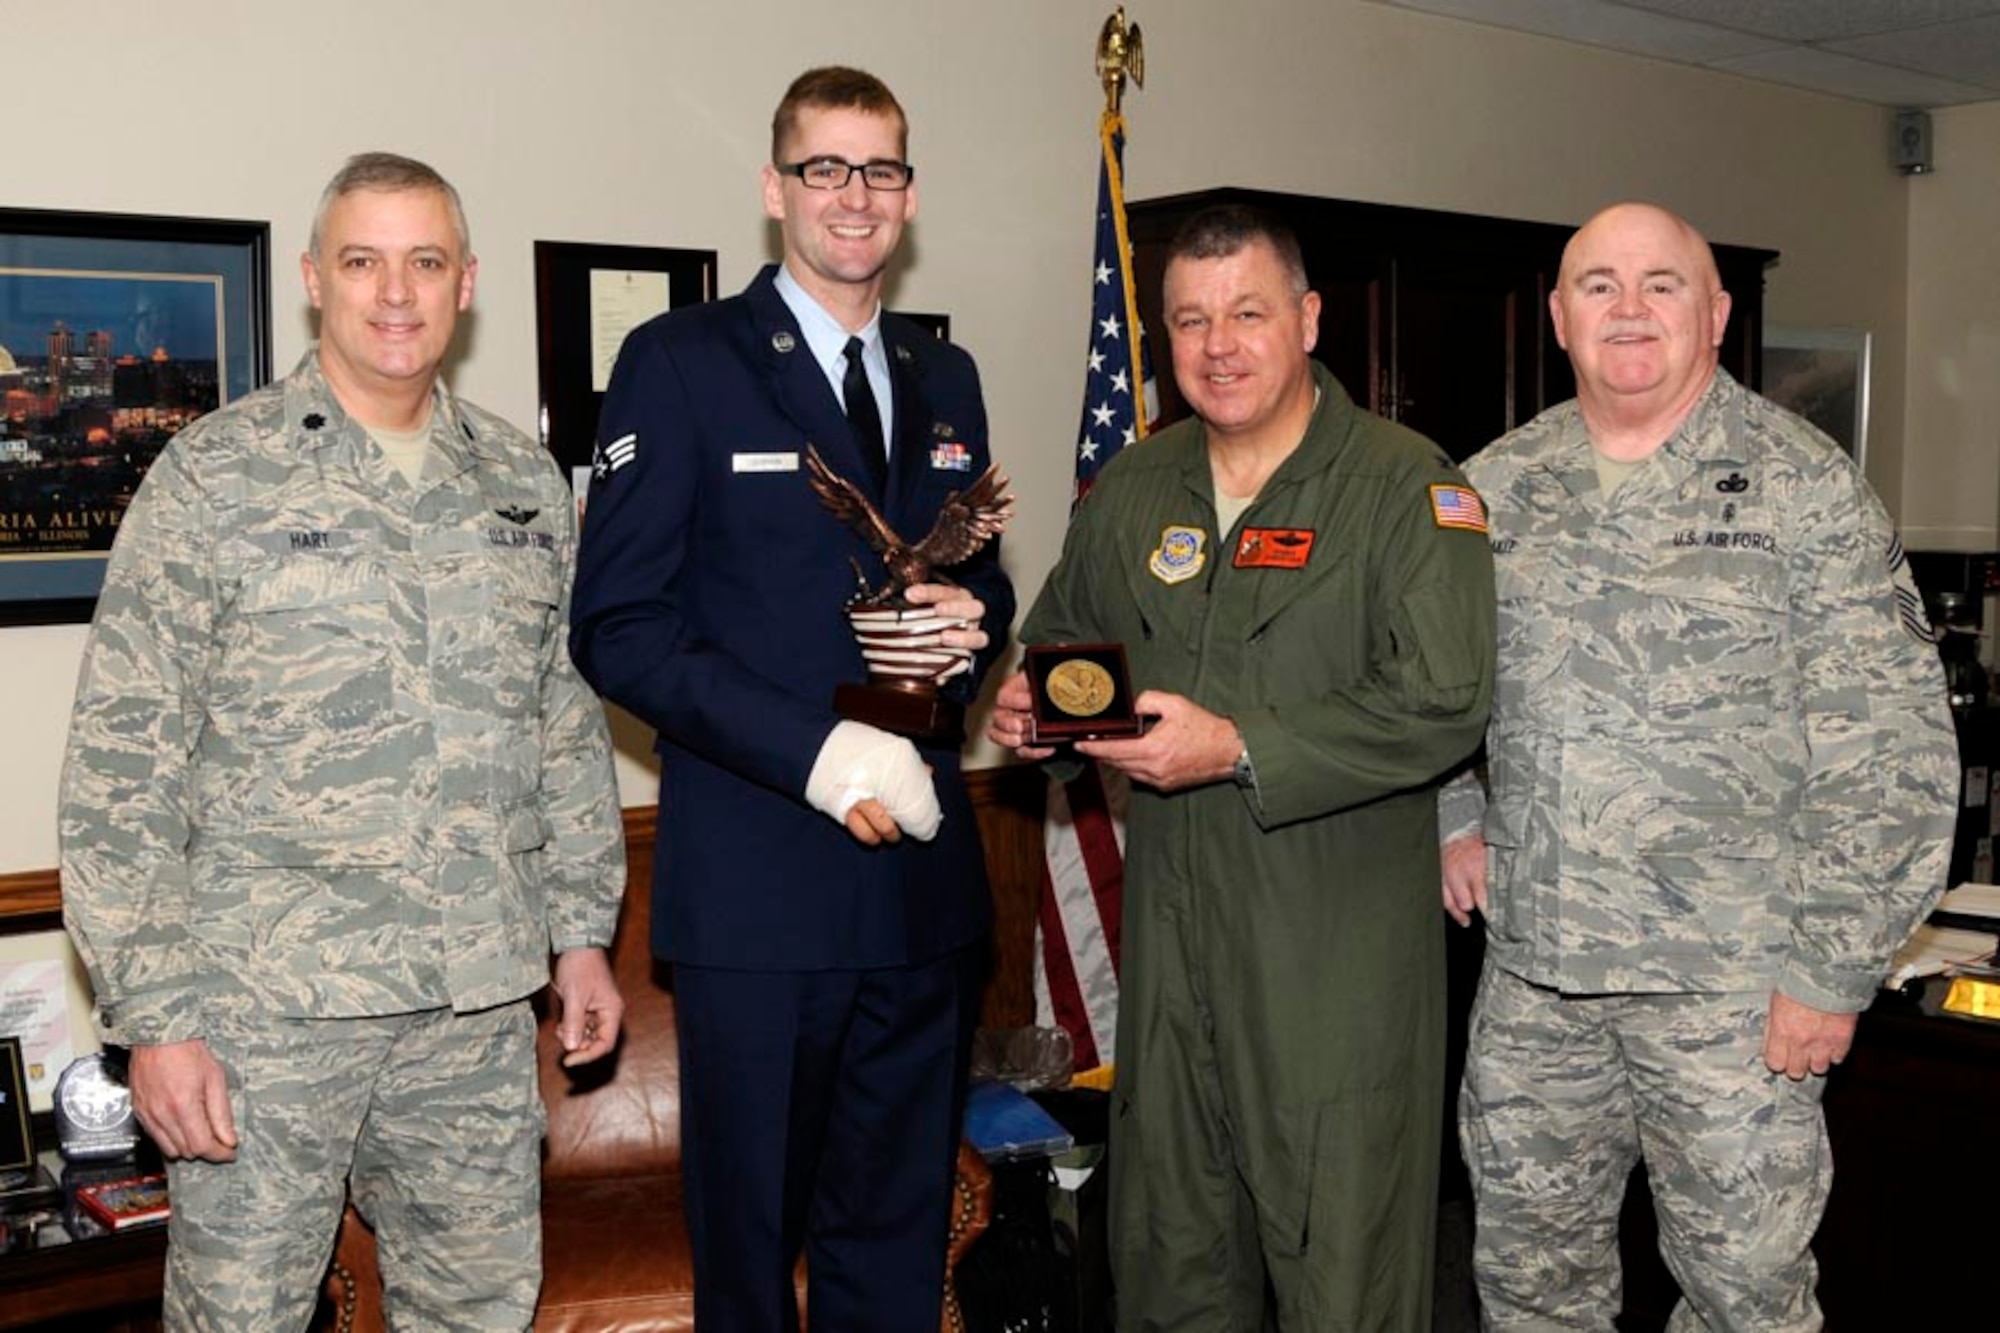 The 2013 Illinois Outstanding Airman of Year award was presented to Senior Airman Alexander Corwin on January 6th, 2013.  Airman Corwin is a traditional Guardsman with the 182nd Maintenance Squadron, 182nd Airlift Wing, at the Peoria Air National Guard Base.  Airman Corwin currently serves as an Airlift Instrument Flight Control Systems Craftsman at the Peoria Air National Guard Base.  Present to bestow the award to him were Colonel William Robertson, Wing Commander; Lieutenant Colonel Robert Hart, Vice Commander; and Chief Master Sergeant Stephen Eakle, Command Chief.  (U.S. Air Force photo by Tech. Sgt. Todd Pendleton/Released)